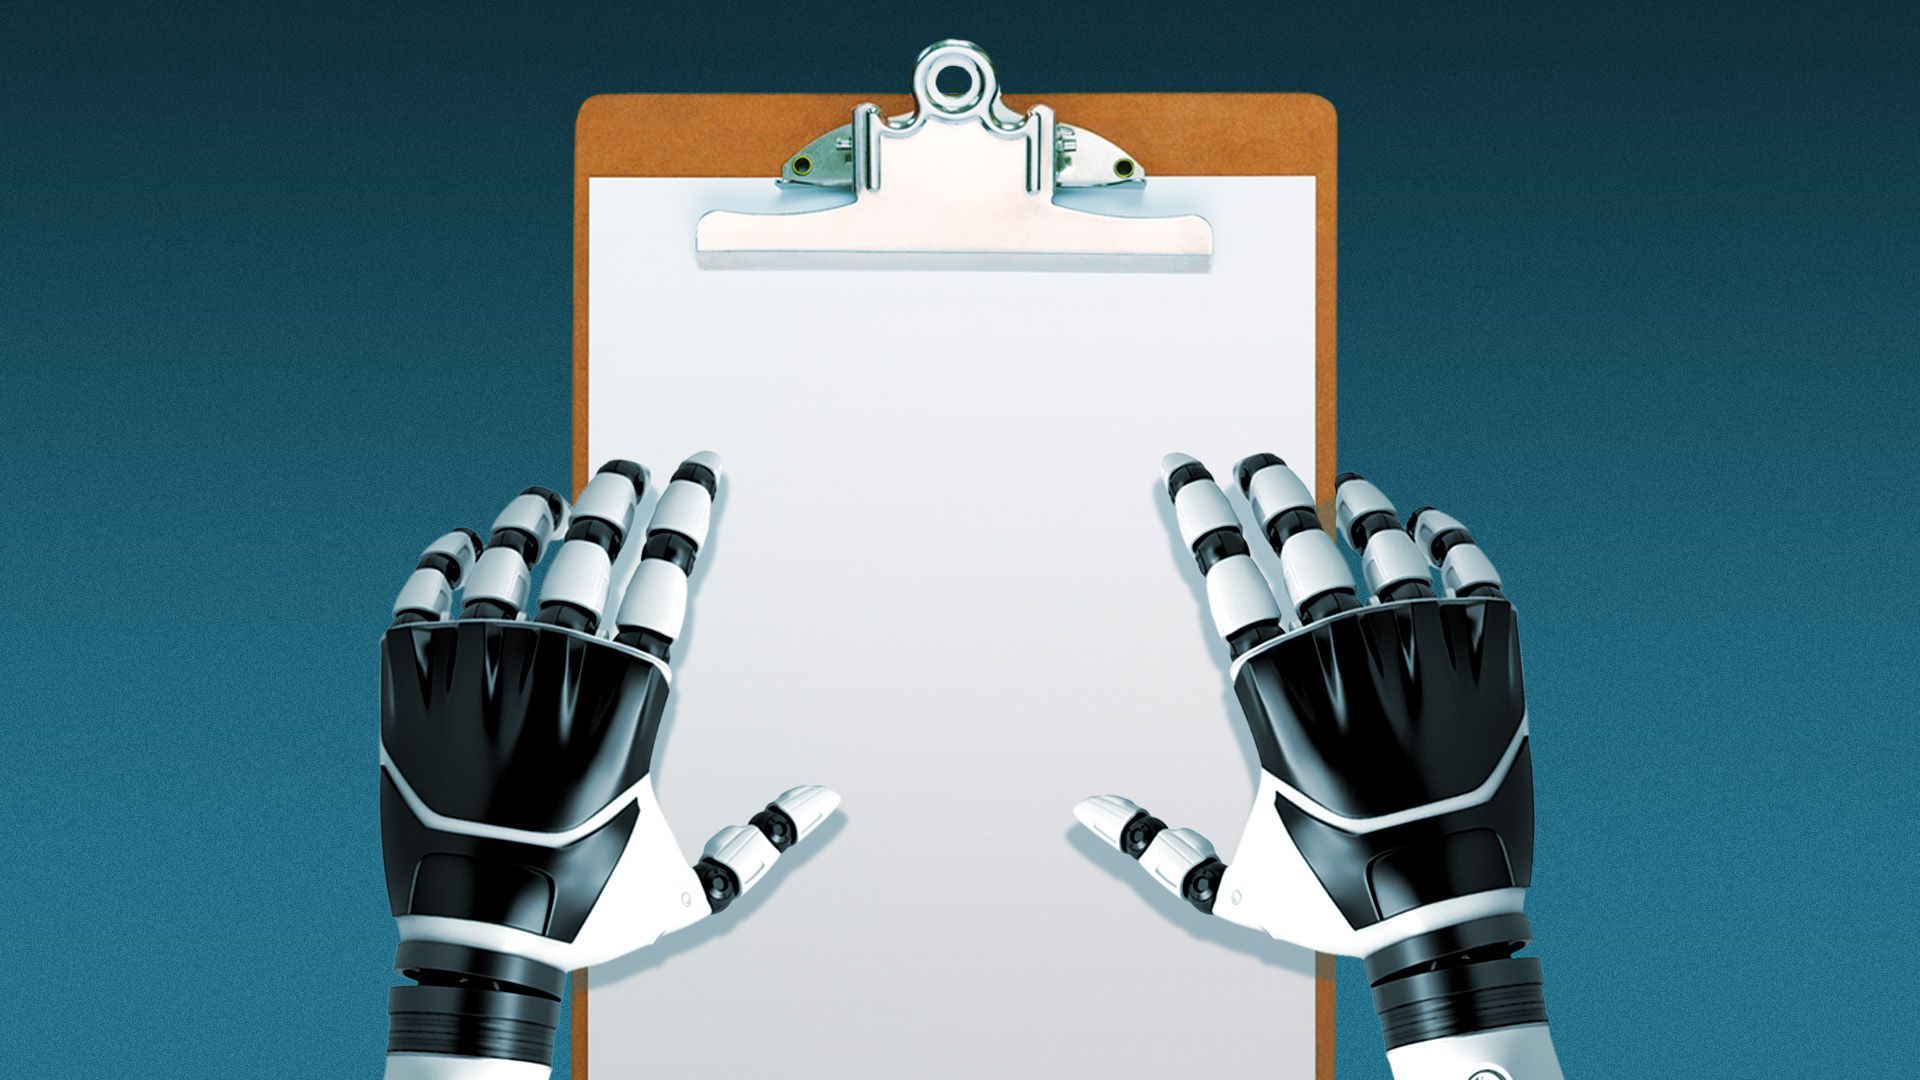 Illustration of robot hands holding a clipboard.